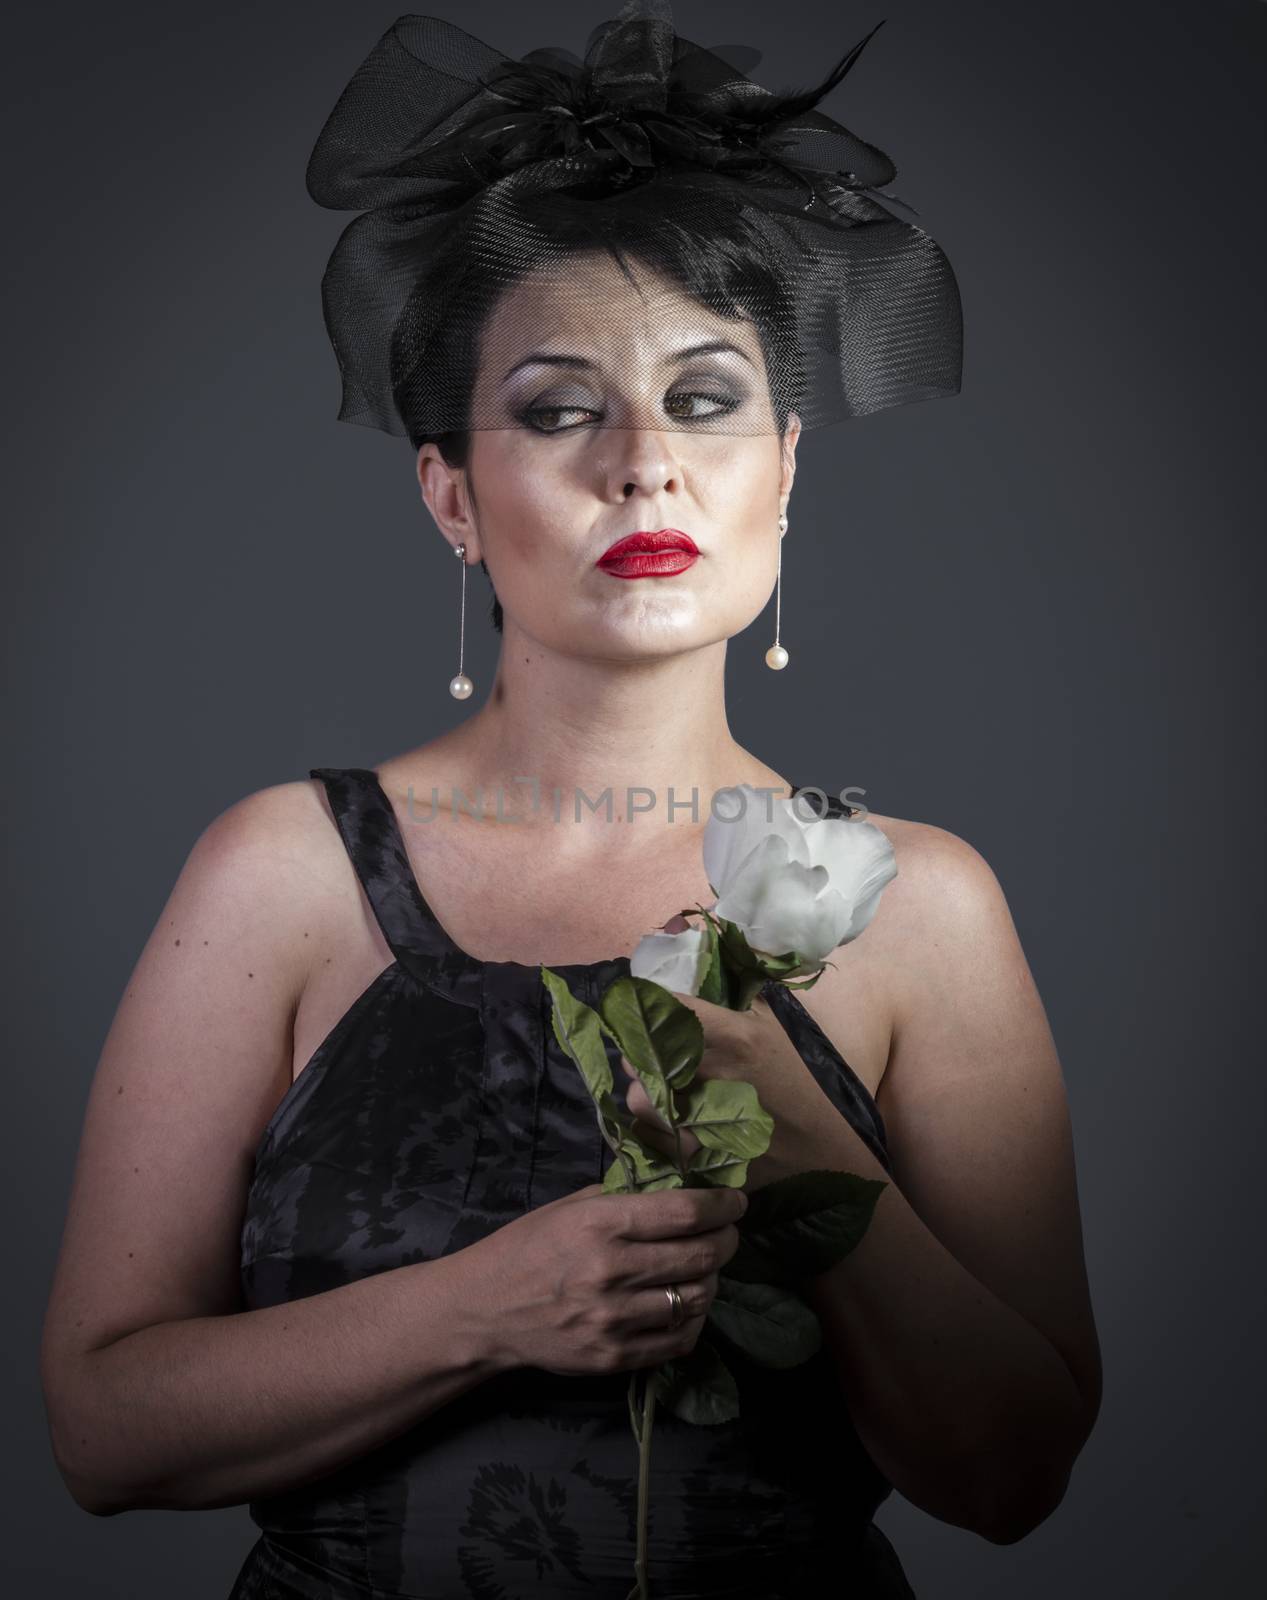 bored.Widow At Funeral. Beautiful retro woman by FernandoCortes